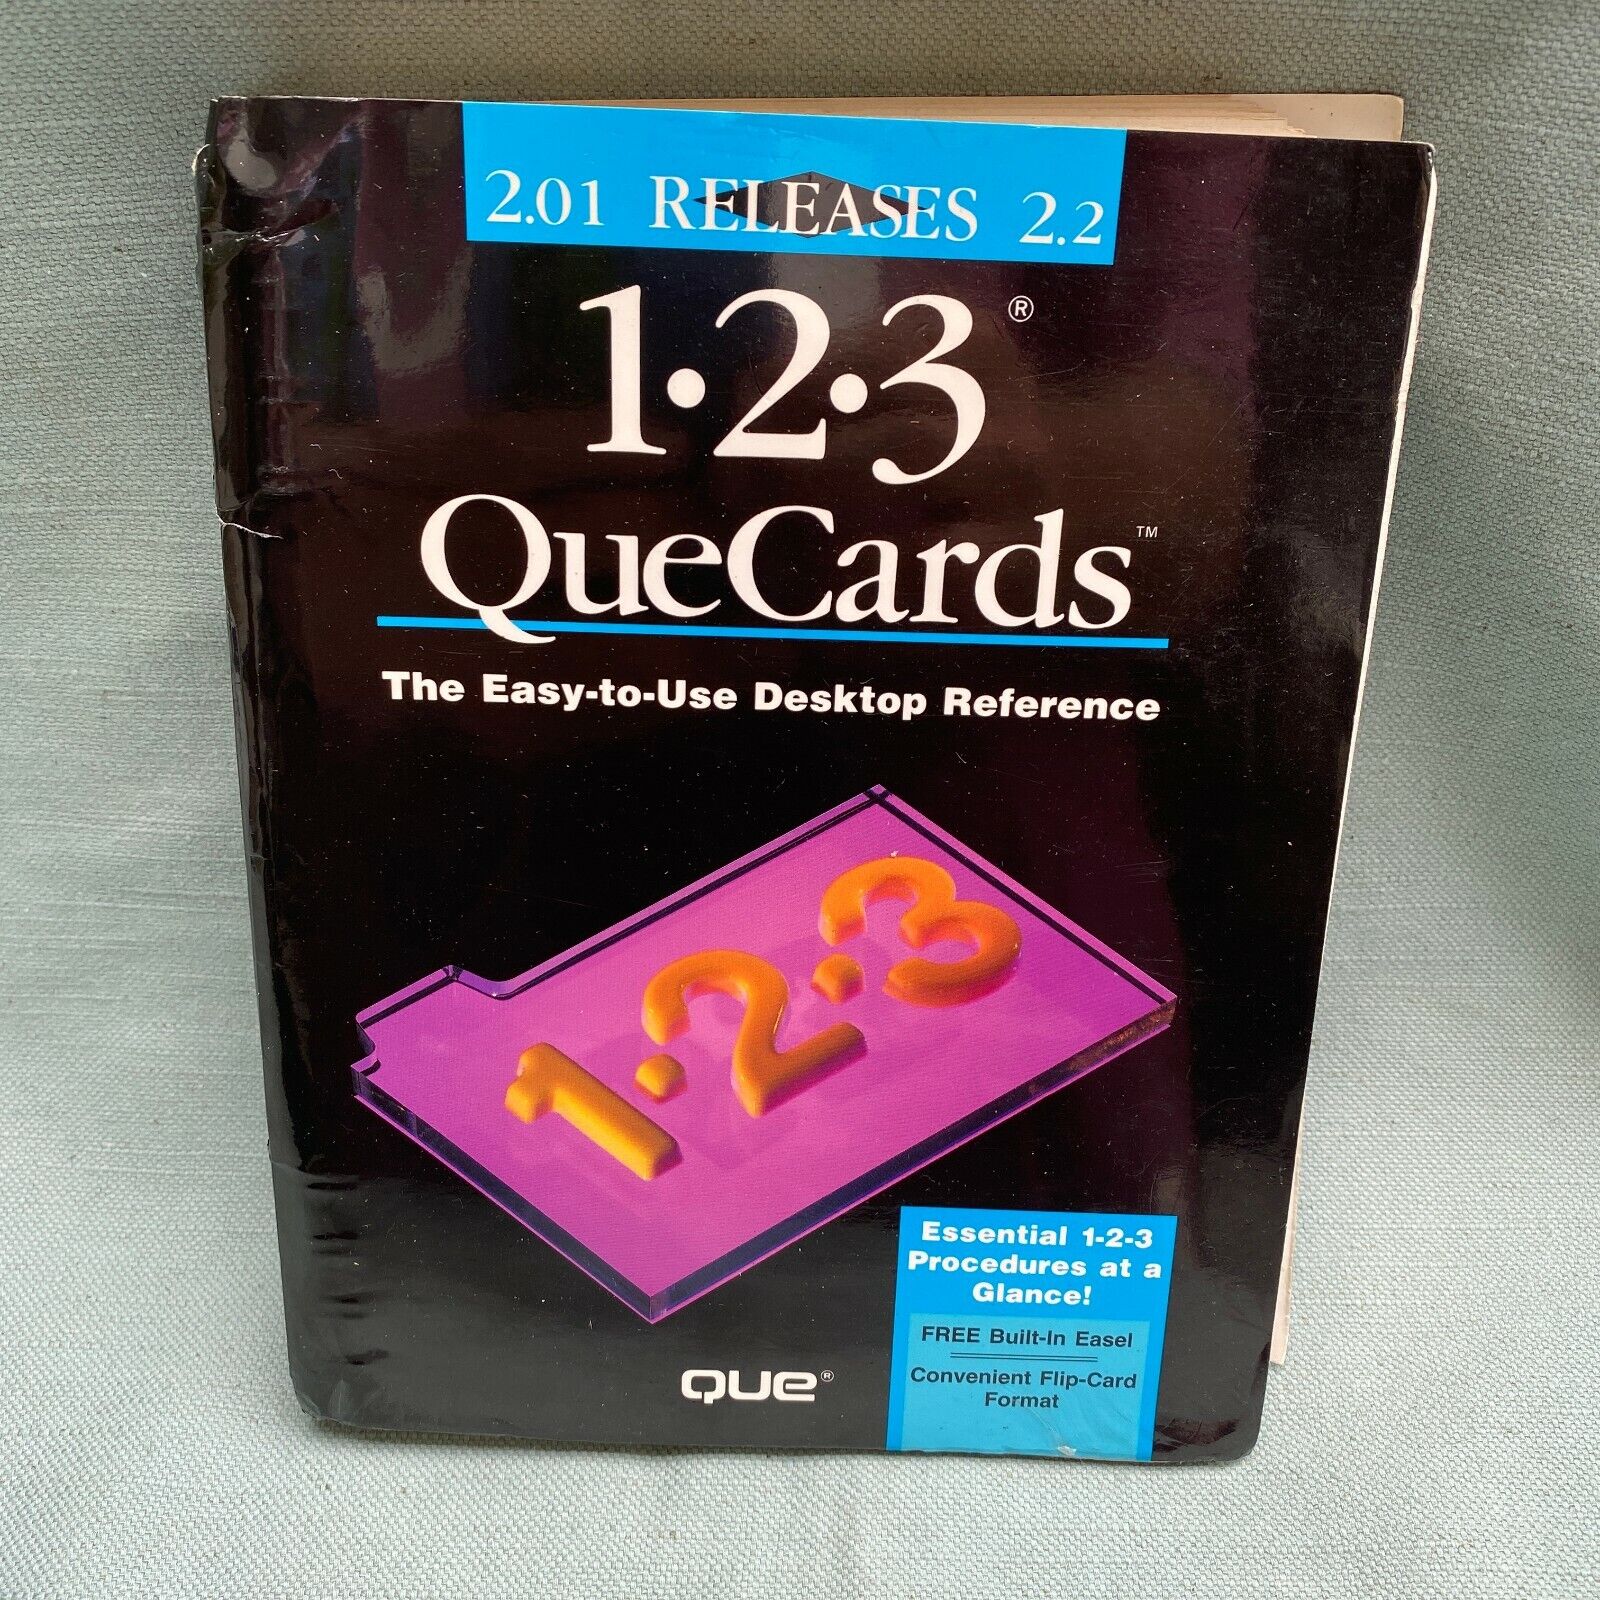 Lotus 123 Standup Que Cards New Release 2.01 2.2 Desktop Reference Manual Book